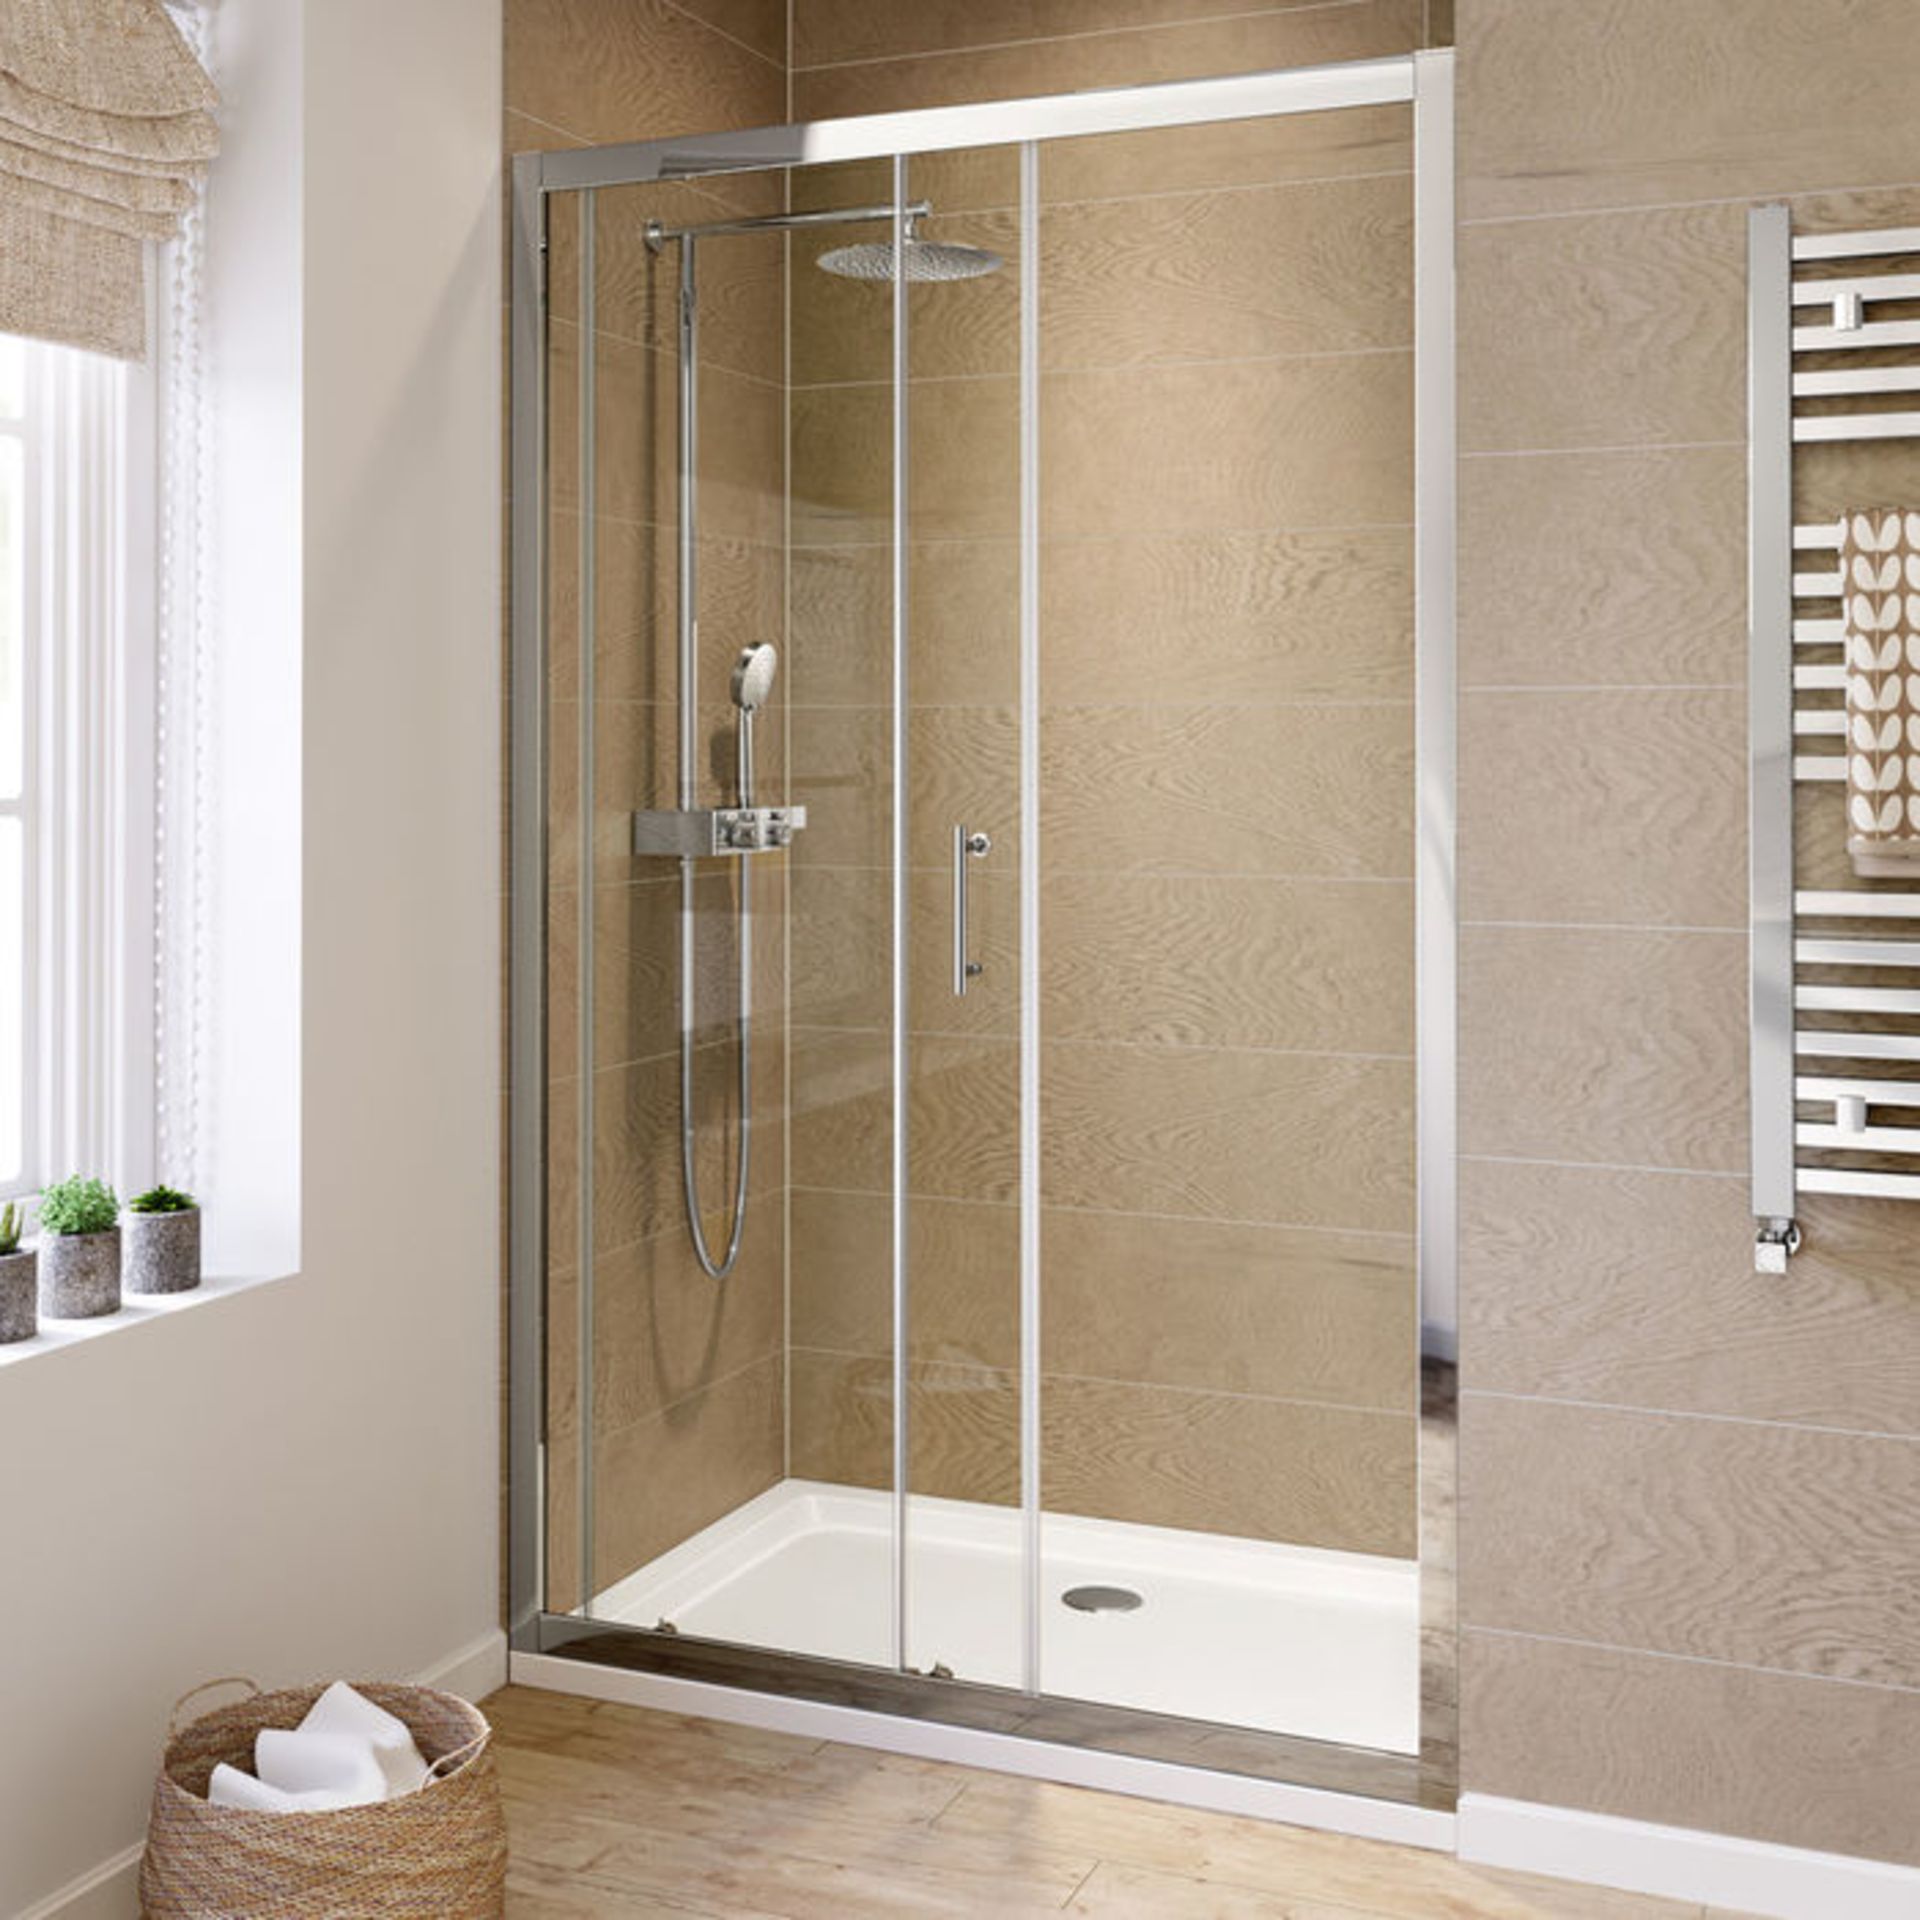 (TS103) 1200mm - 6mm - Elements Sliding Shower Door. RRP £299.99. 6mm Safety Glass Fully